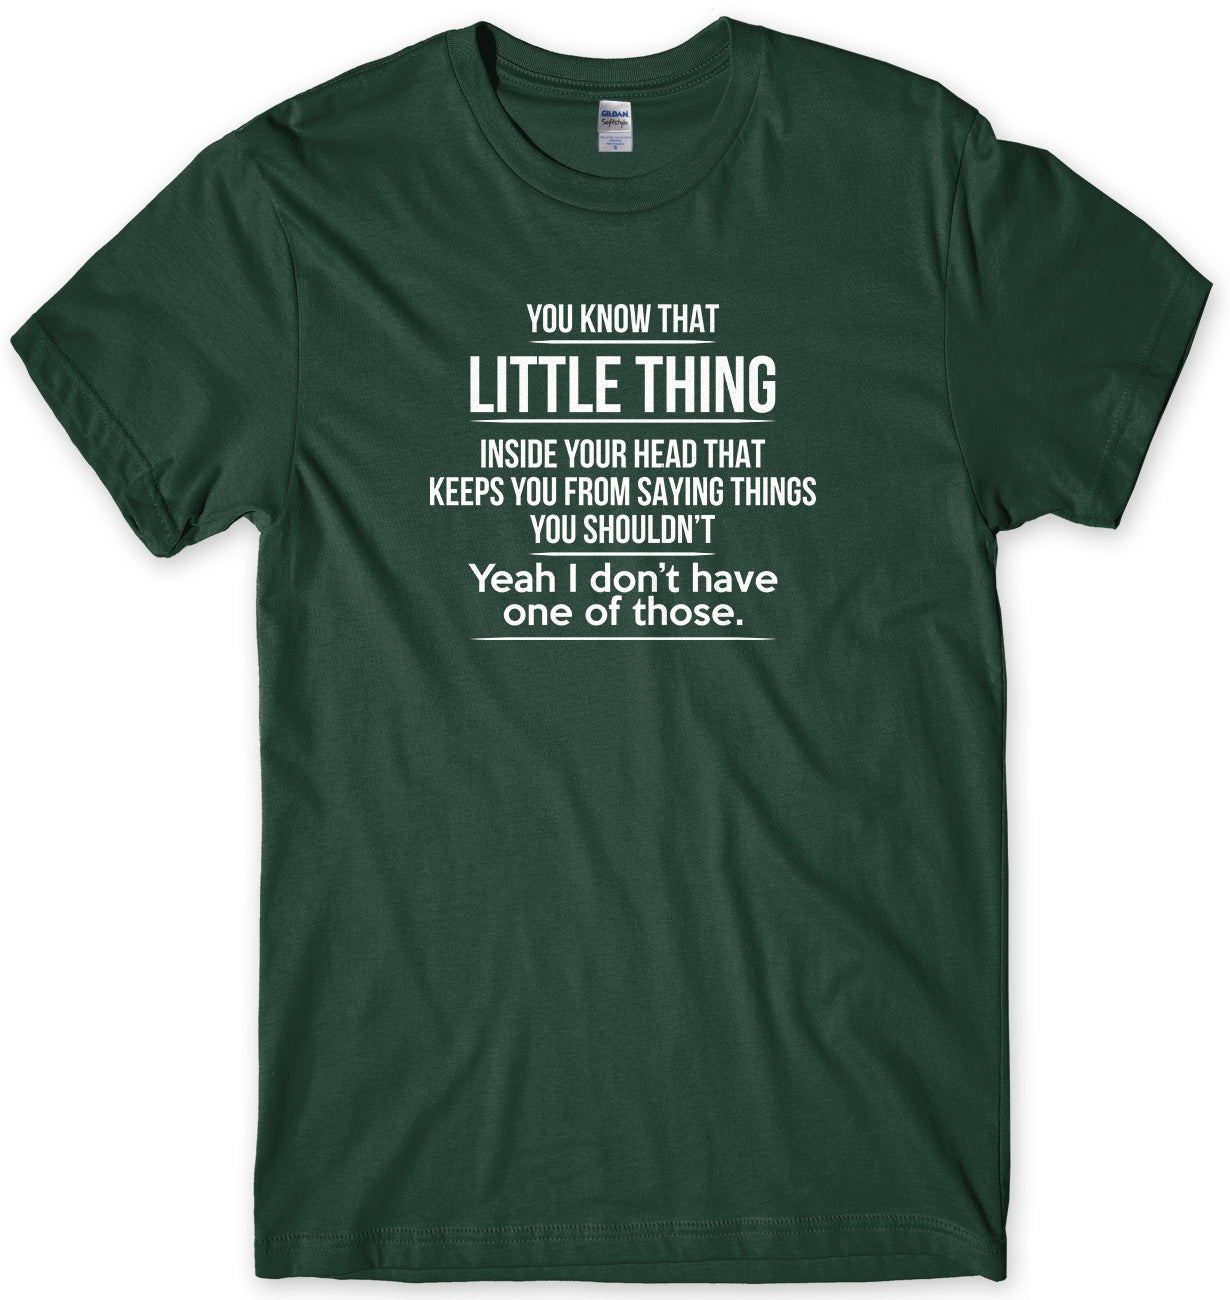 That Little Thing Inside Your Head That Keeps You From Saying Things You Shouldn't Mens Unisex Style T-Shirt